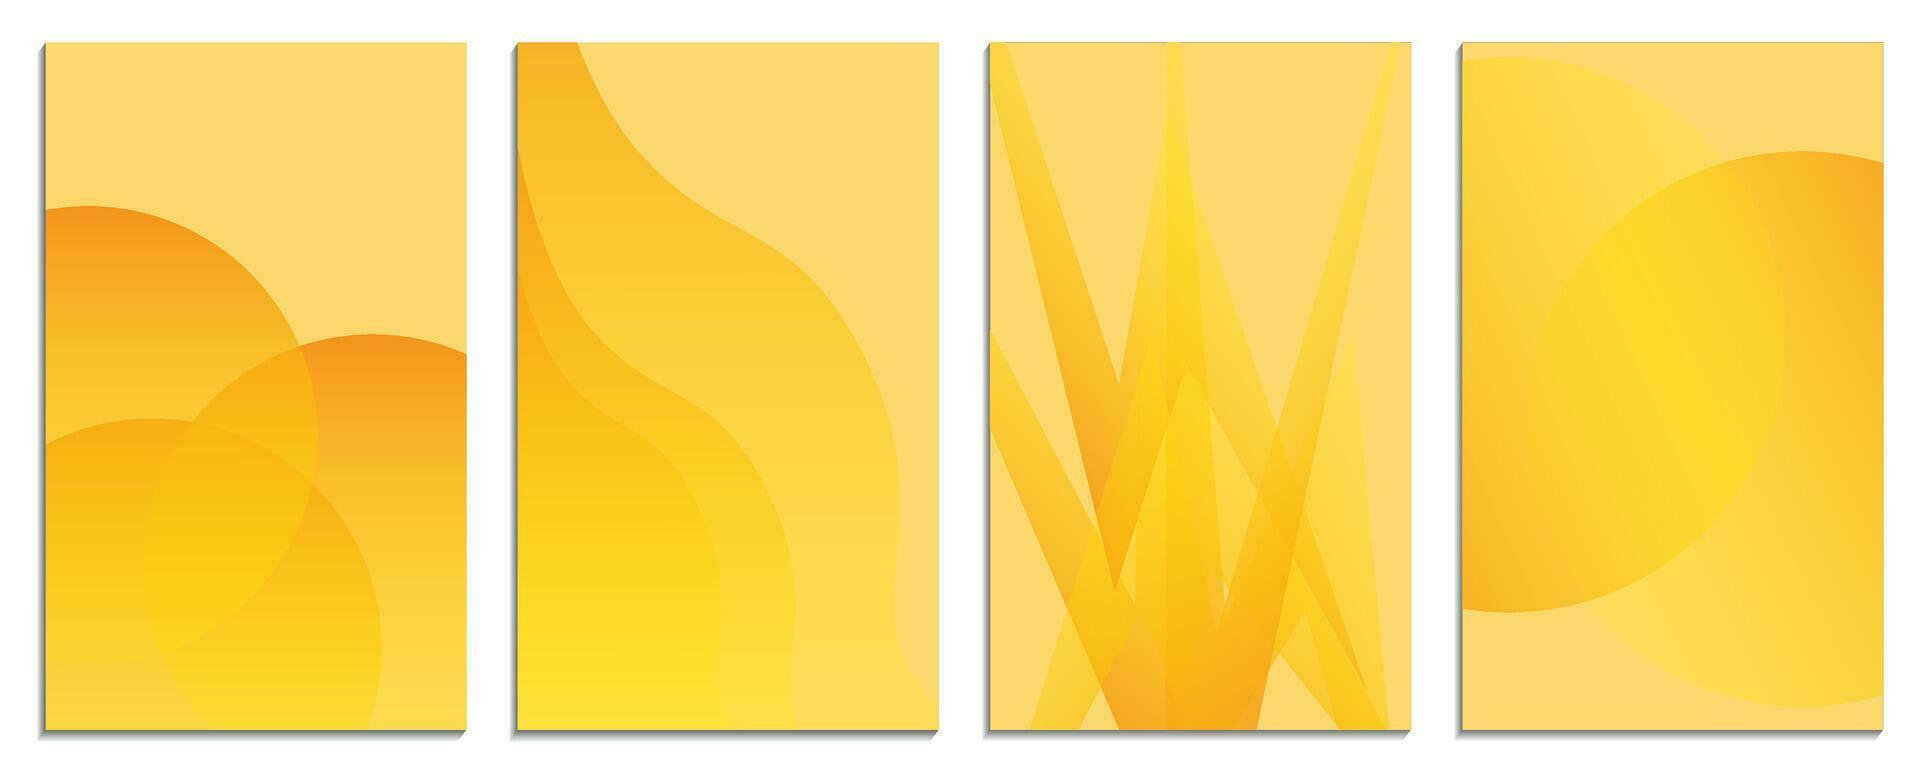 Set of abstract backgrounds in orange and yellow colors. Vector illustration.